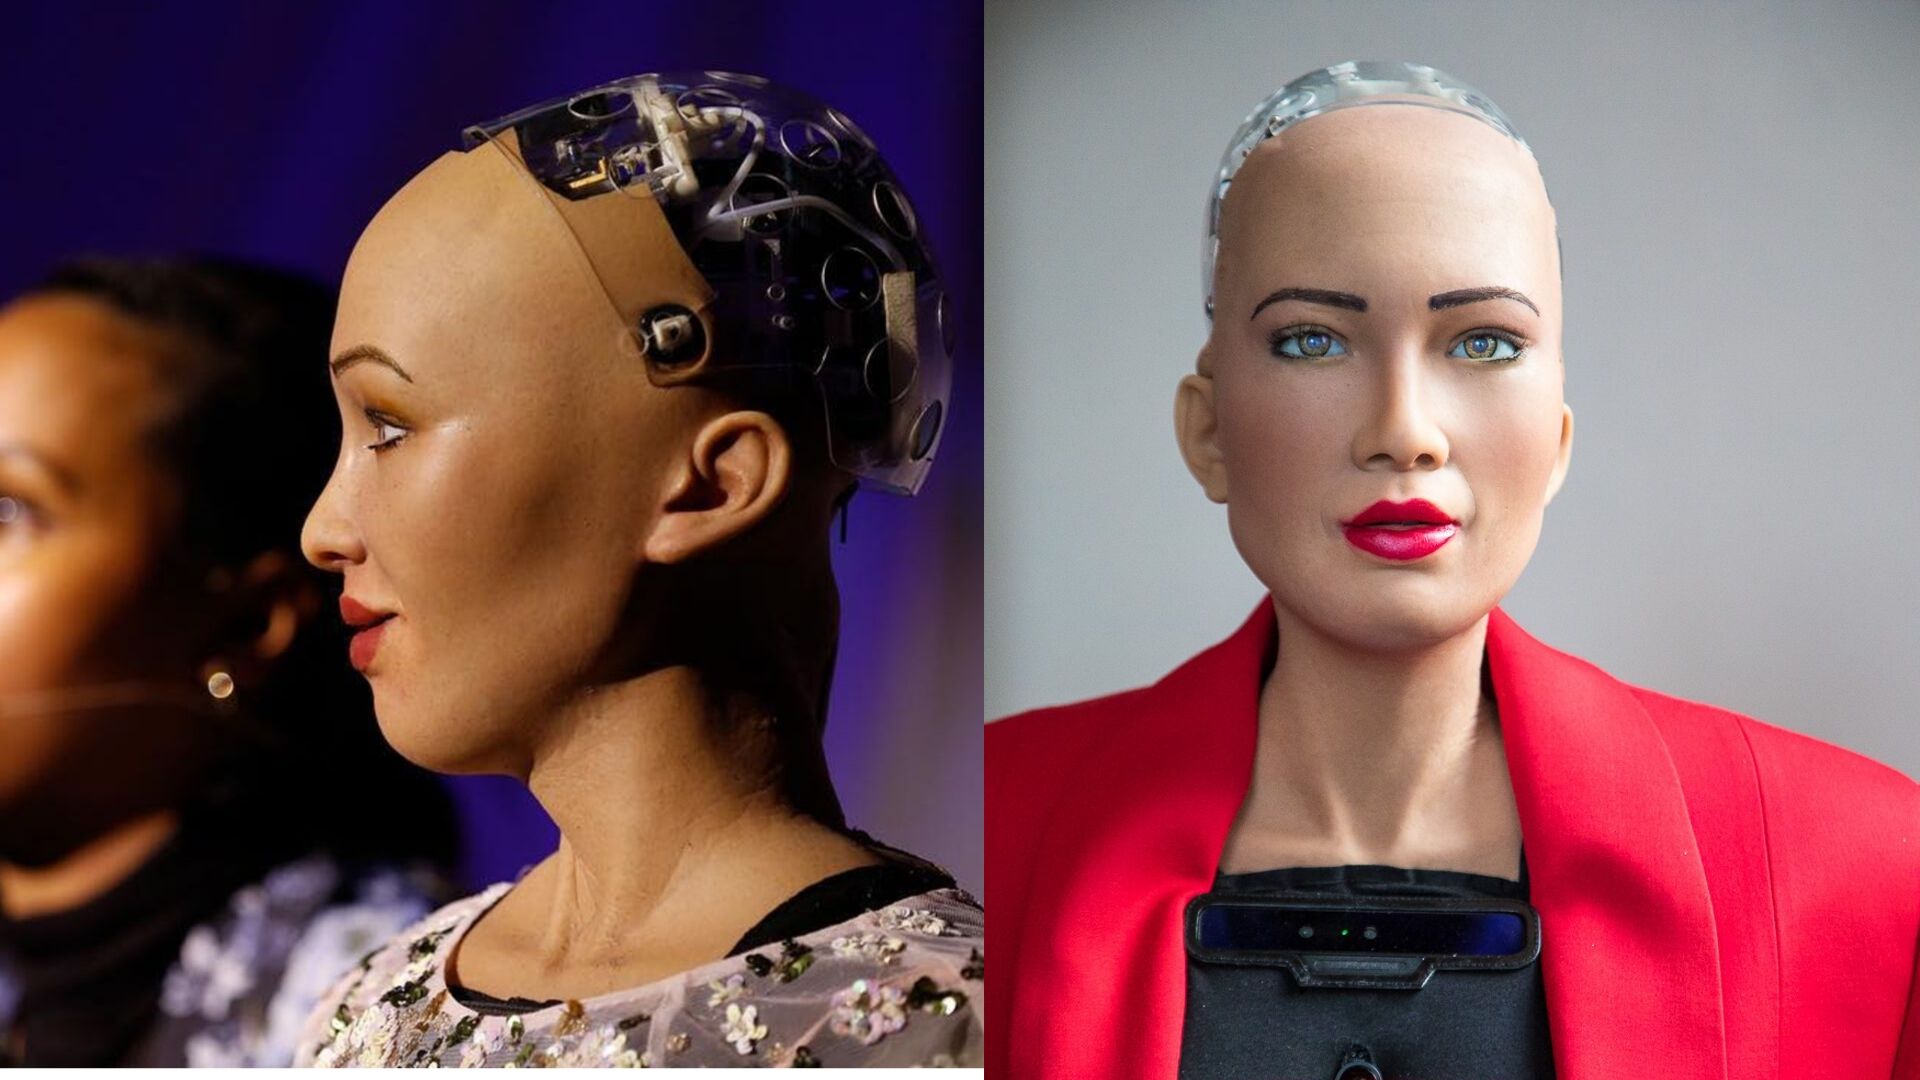 5 Things To About Sophia The Robot Before Her Trip To Dubai | Harper's Bazaar Arabia